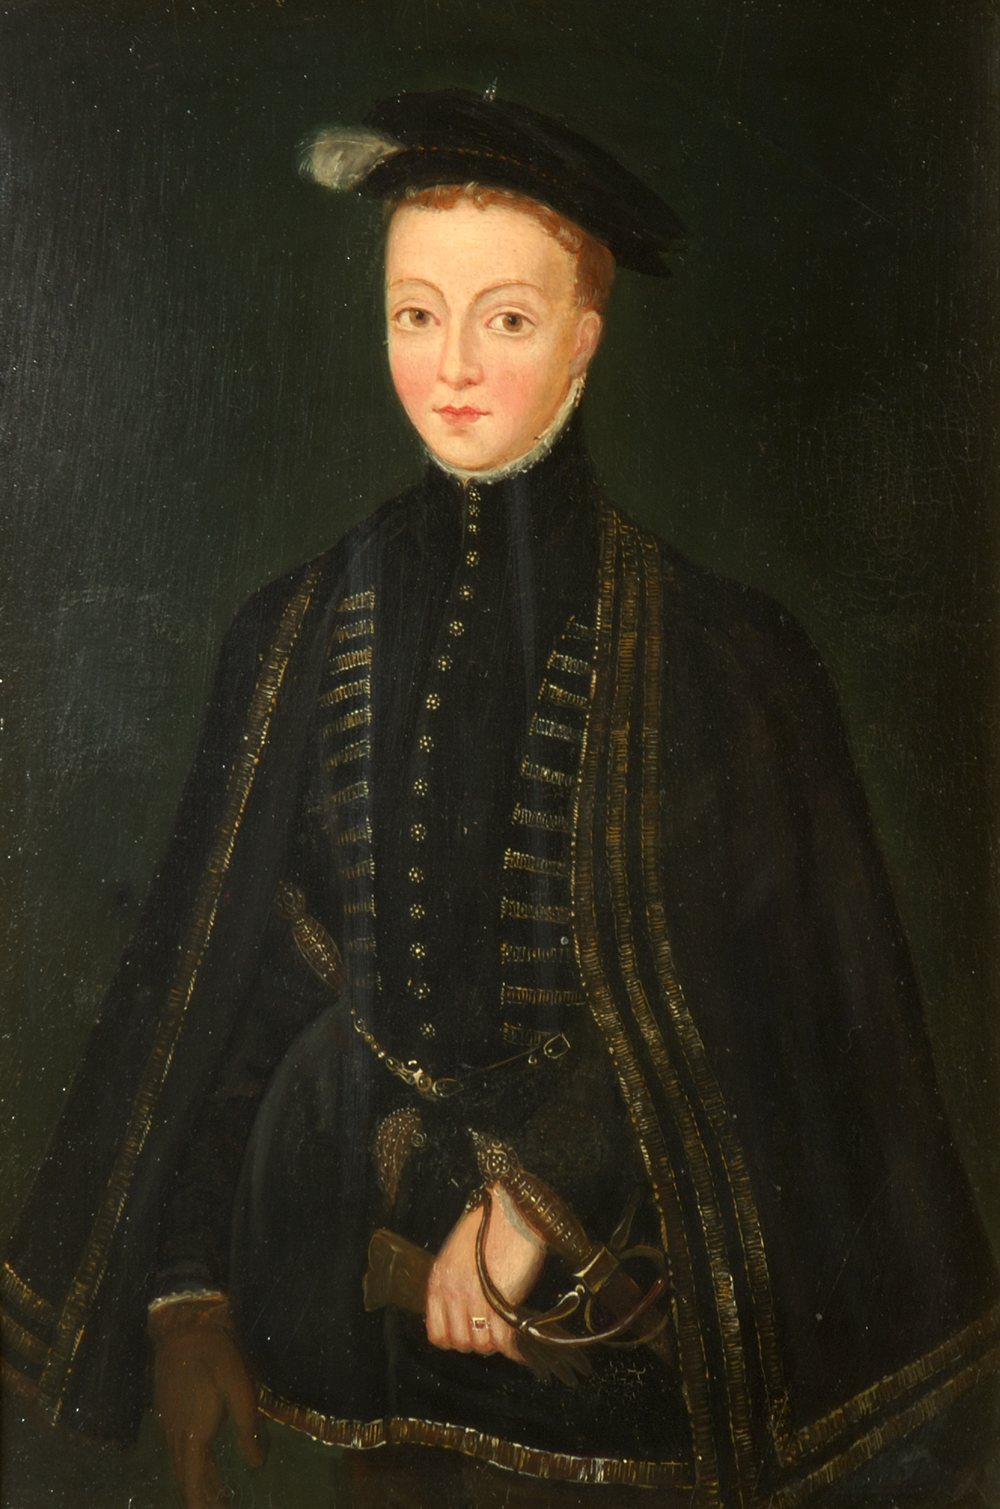 A portrait of a young Lord Darnley. He is dressed in a black and gold outfit with a black hat. he has short red hair and is wearing a sword at his waist. 